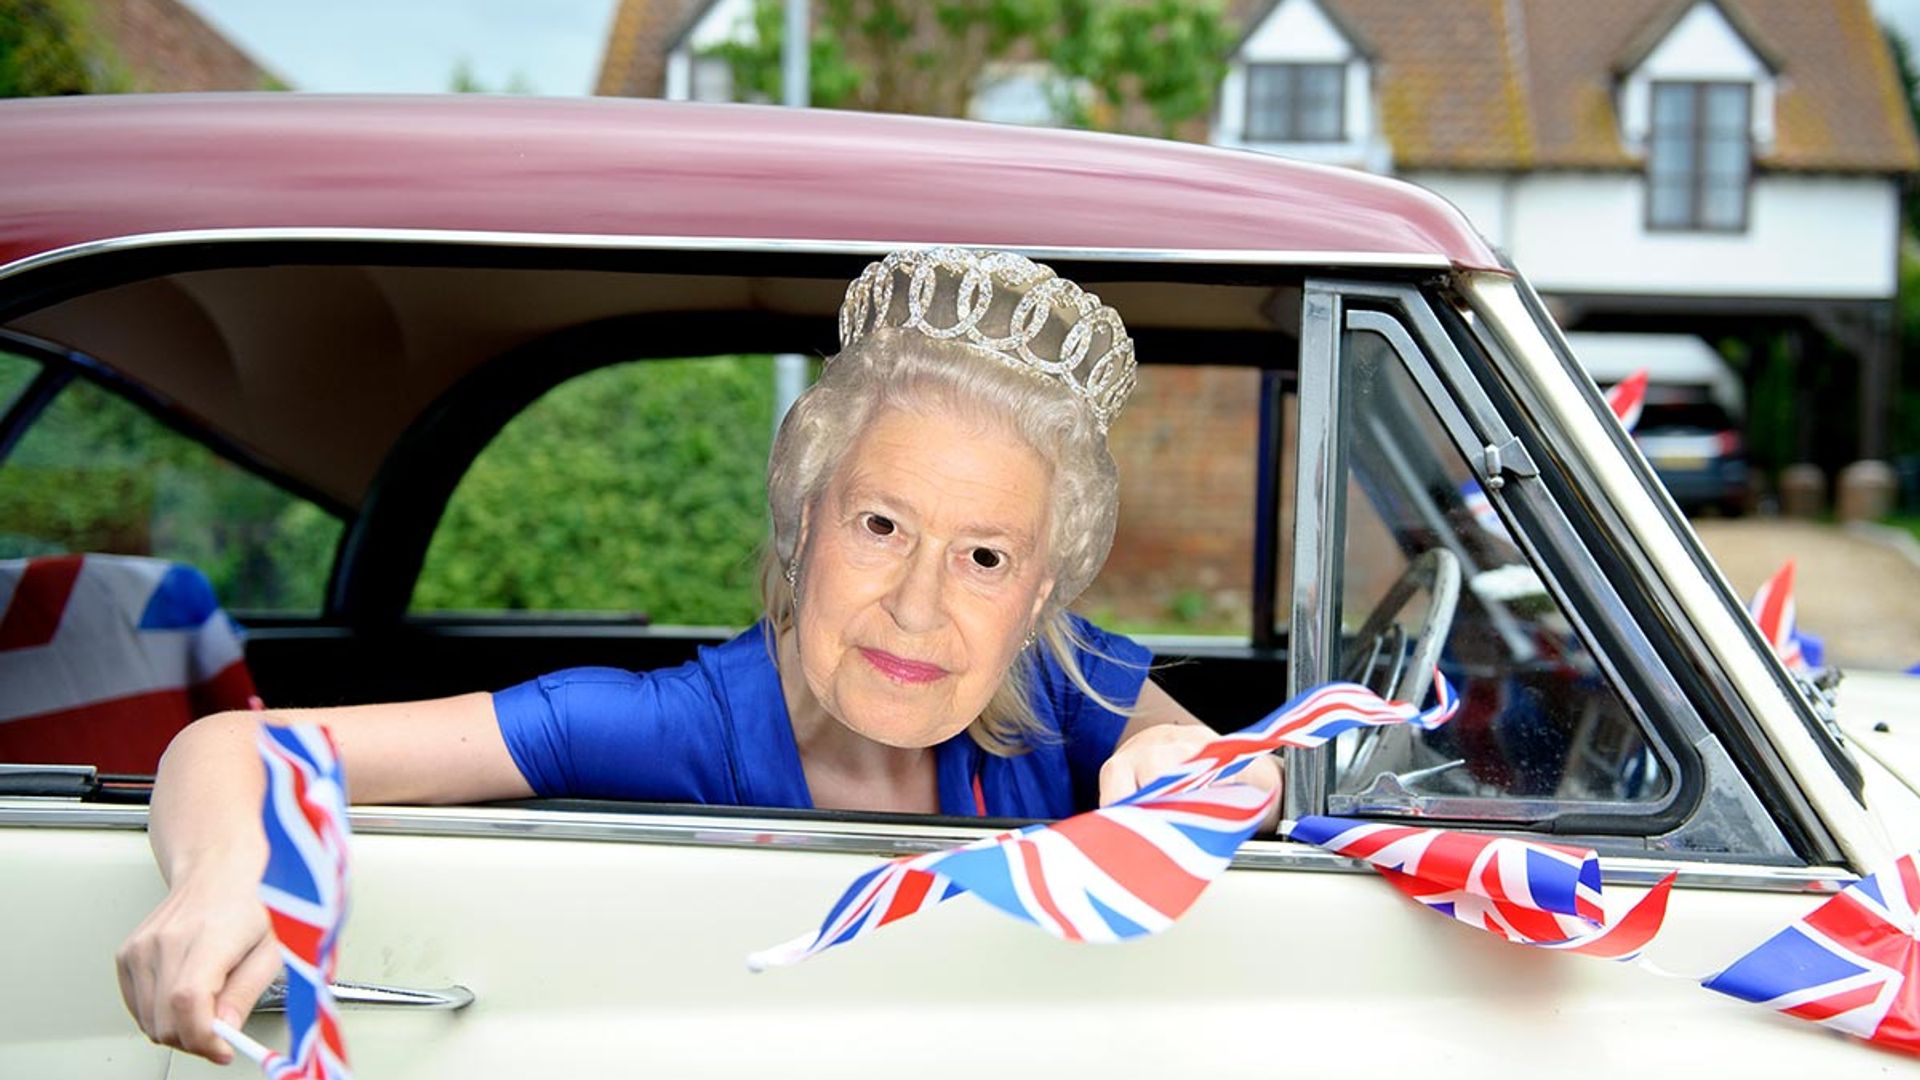 Royal fancy dress ideas for the Jubilee weekend - because the Queen celebrates a 70-year reign only once 